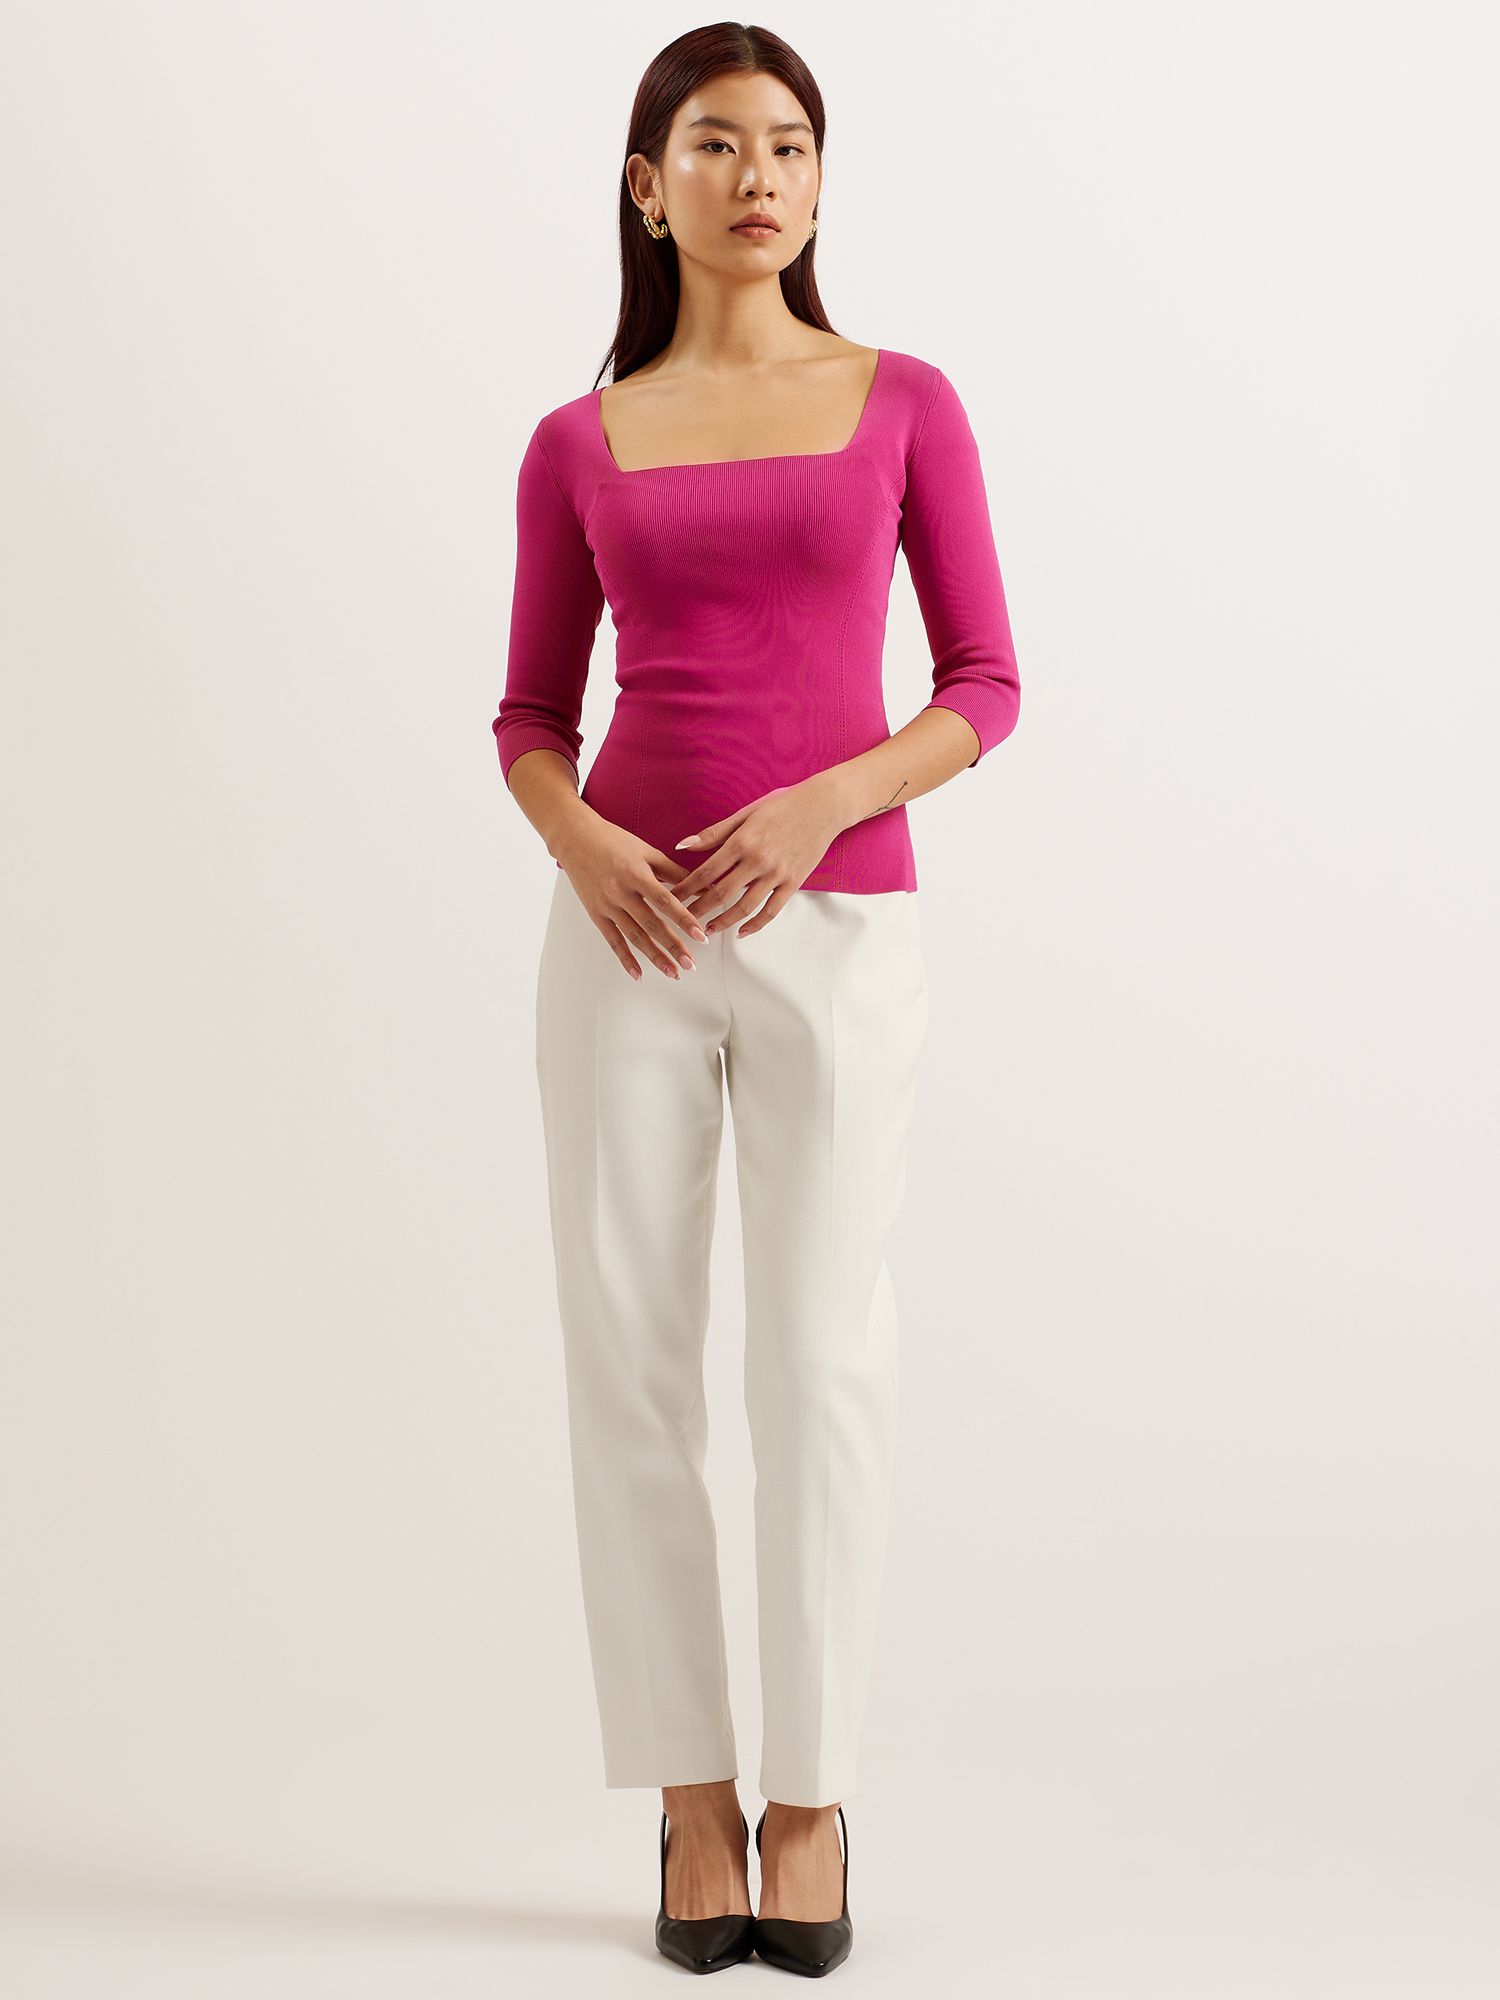 Ted Baker Vallryy Square Neck Fitted Knit Top, Pink Hot, 12